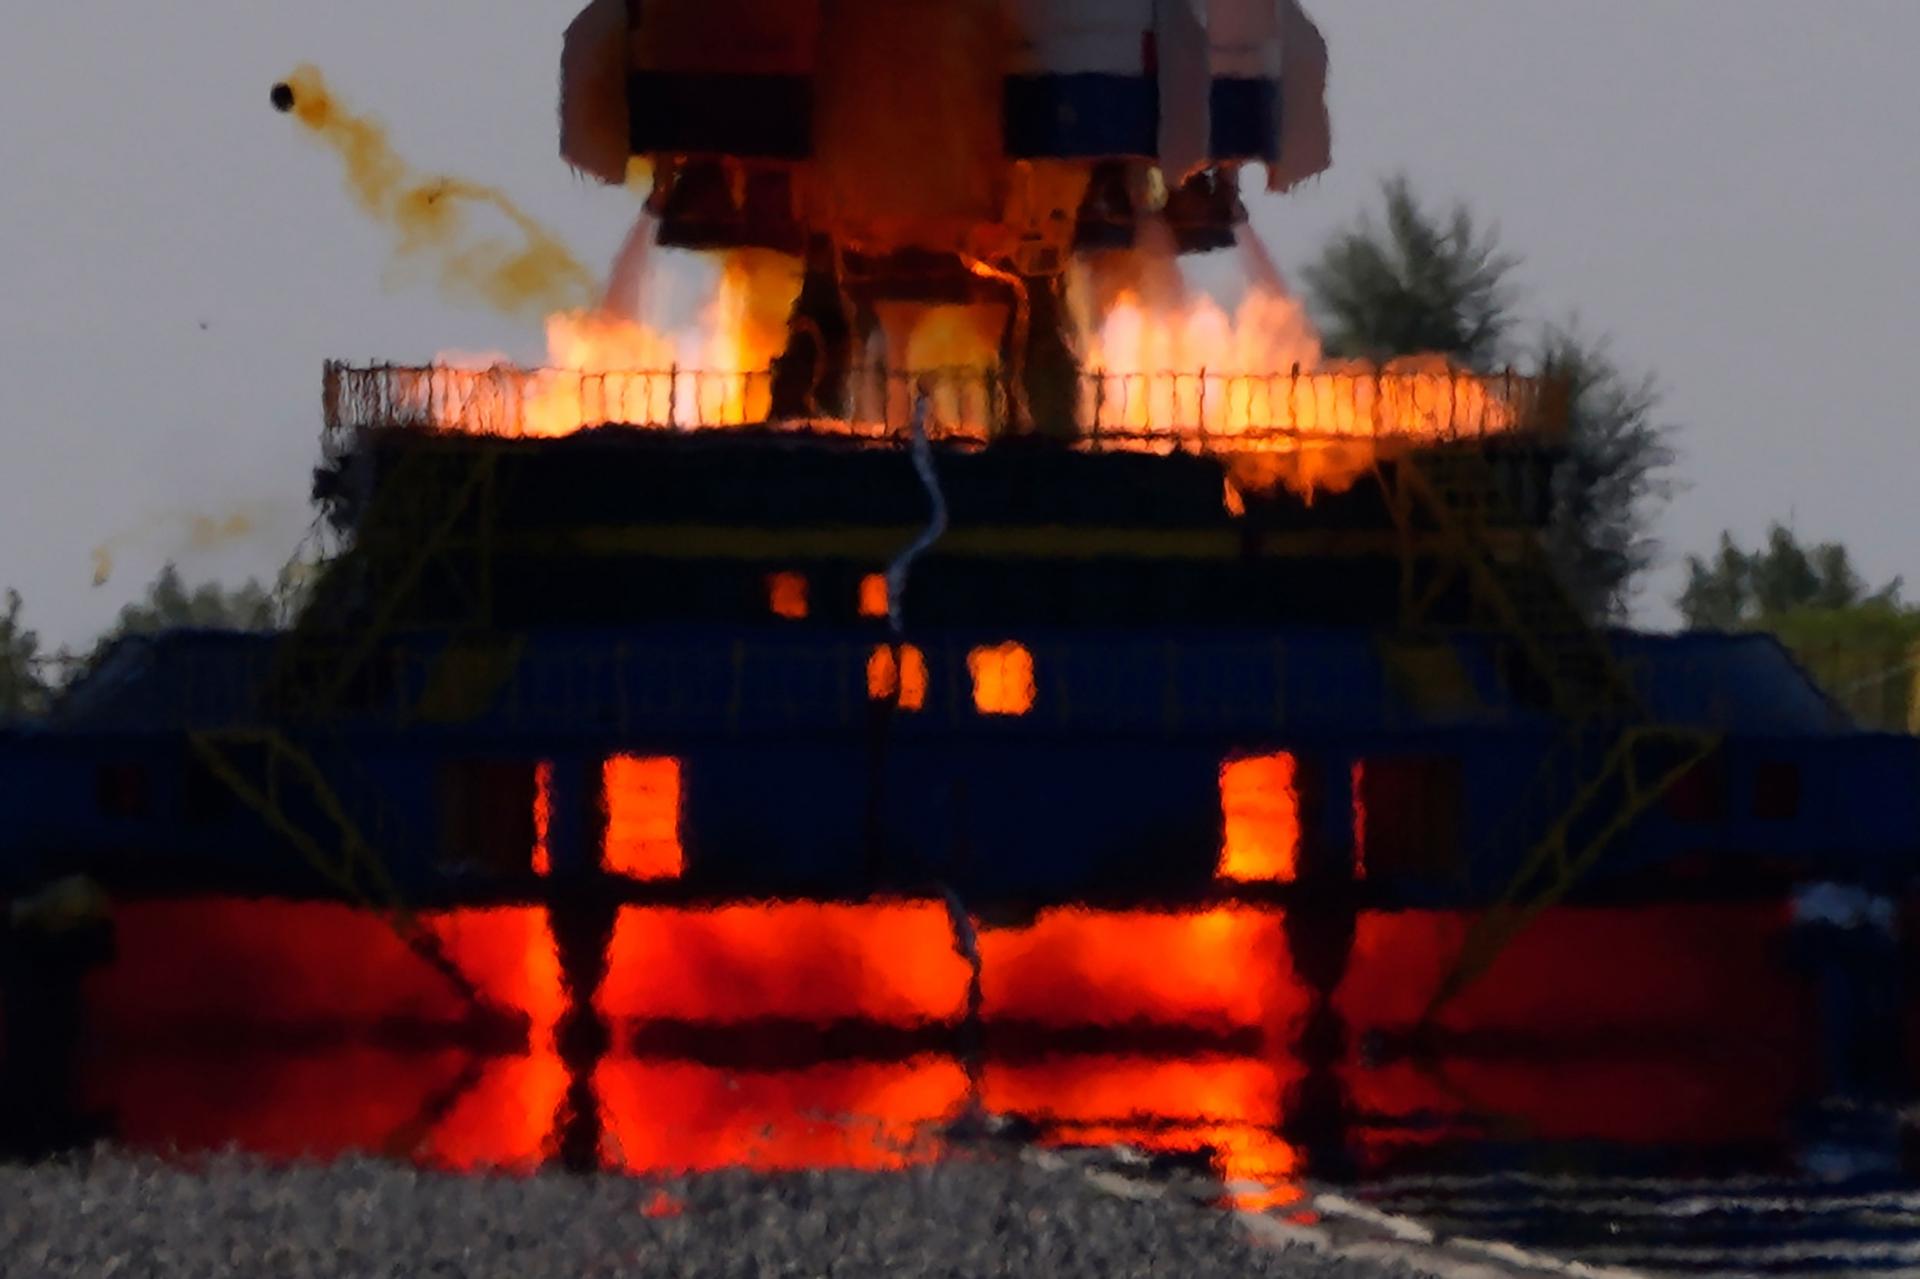 A close up photograph shows fire coming out of the exhaust of the rockets carrying the Chinese spaceship.